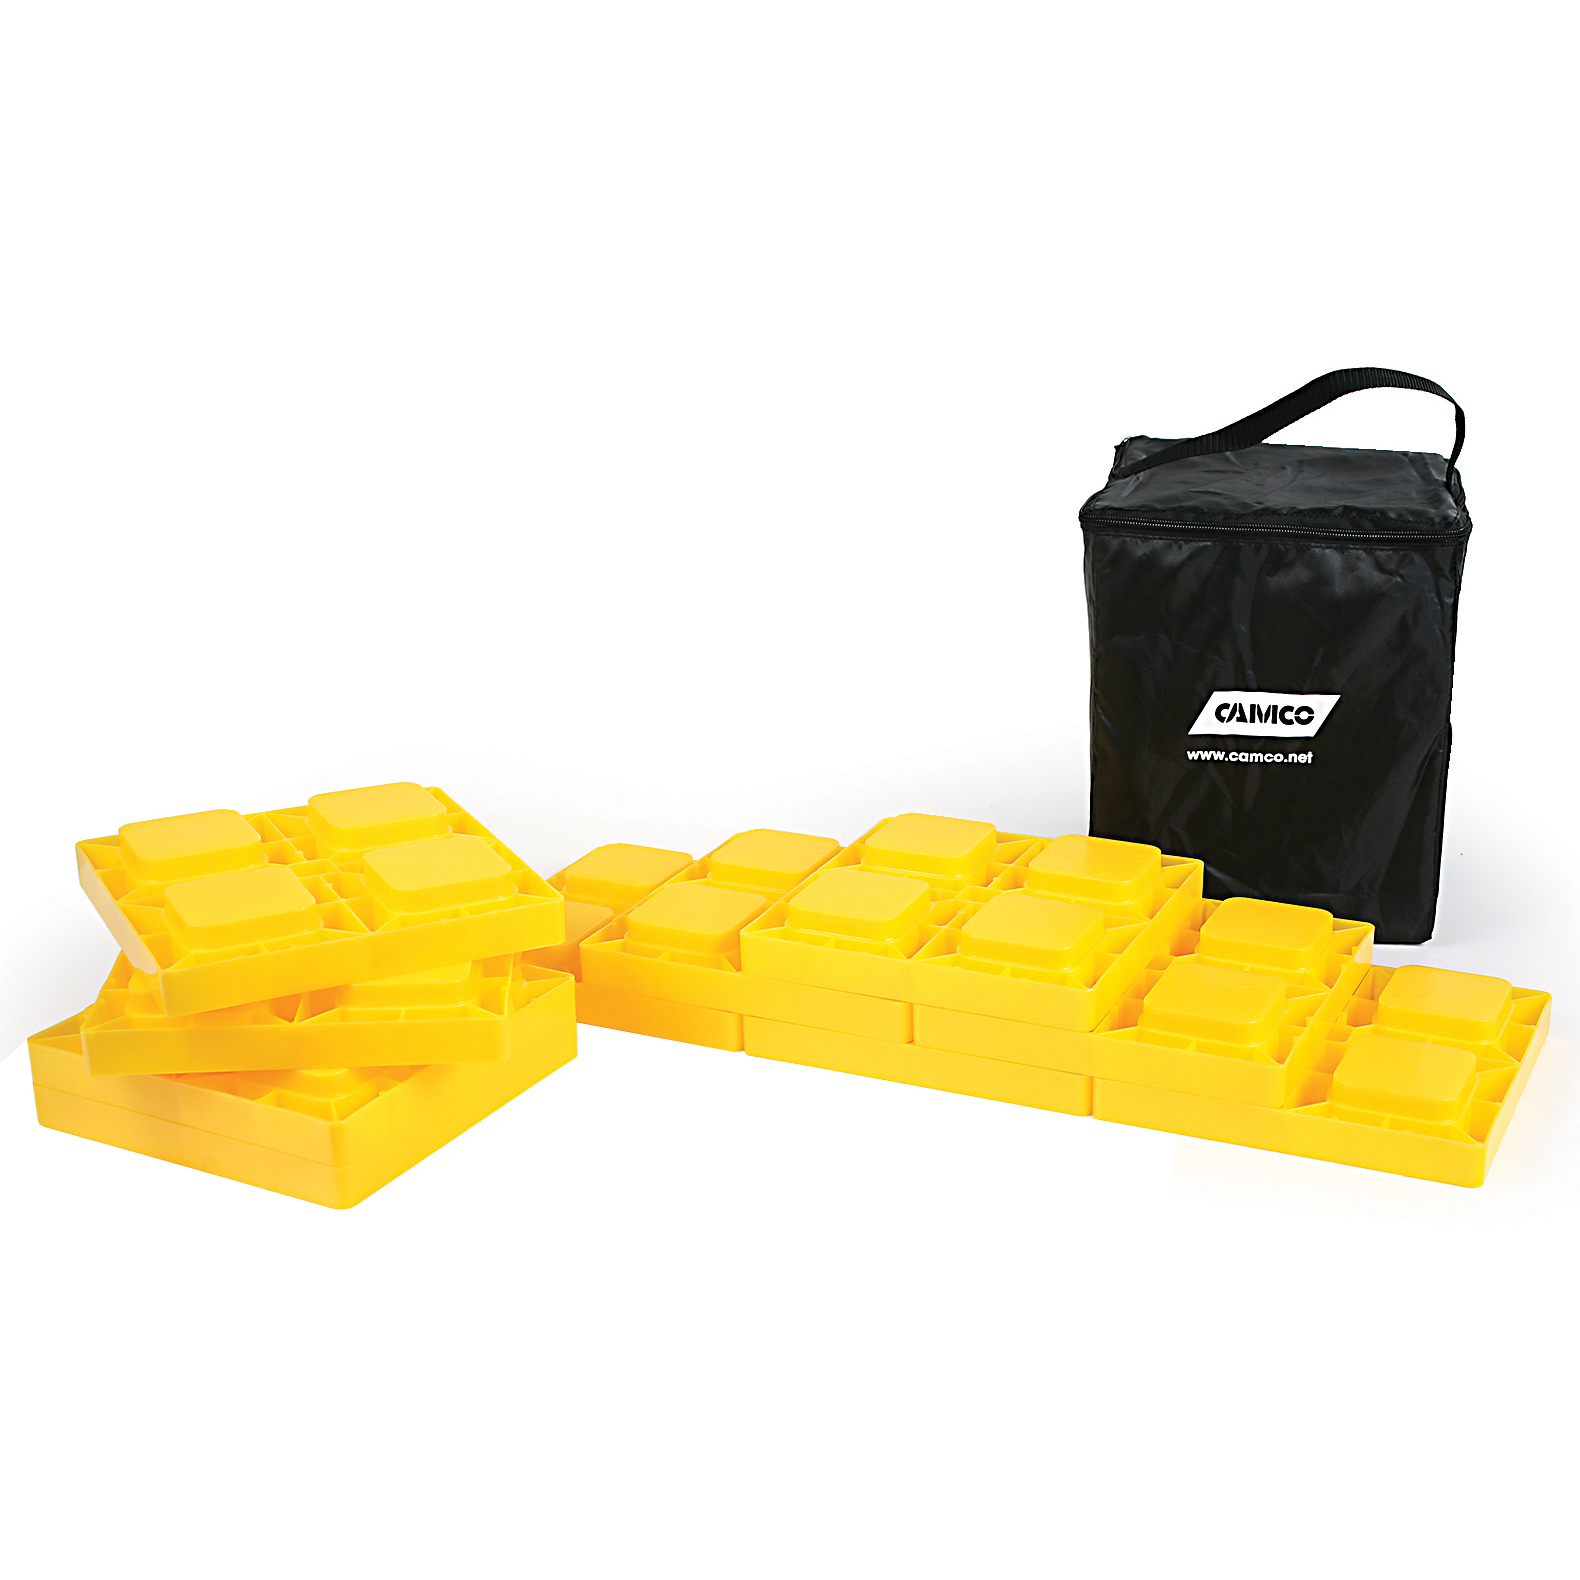 Camco Heavy Duty Leveling Blocks (10-pack) at Walmart